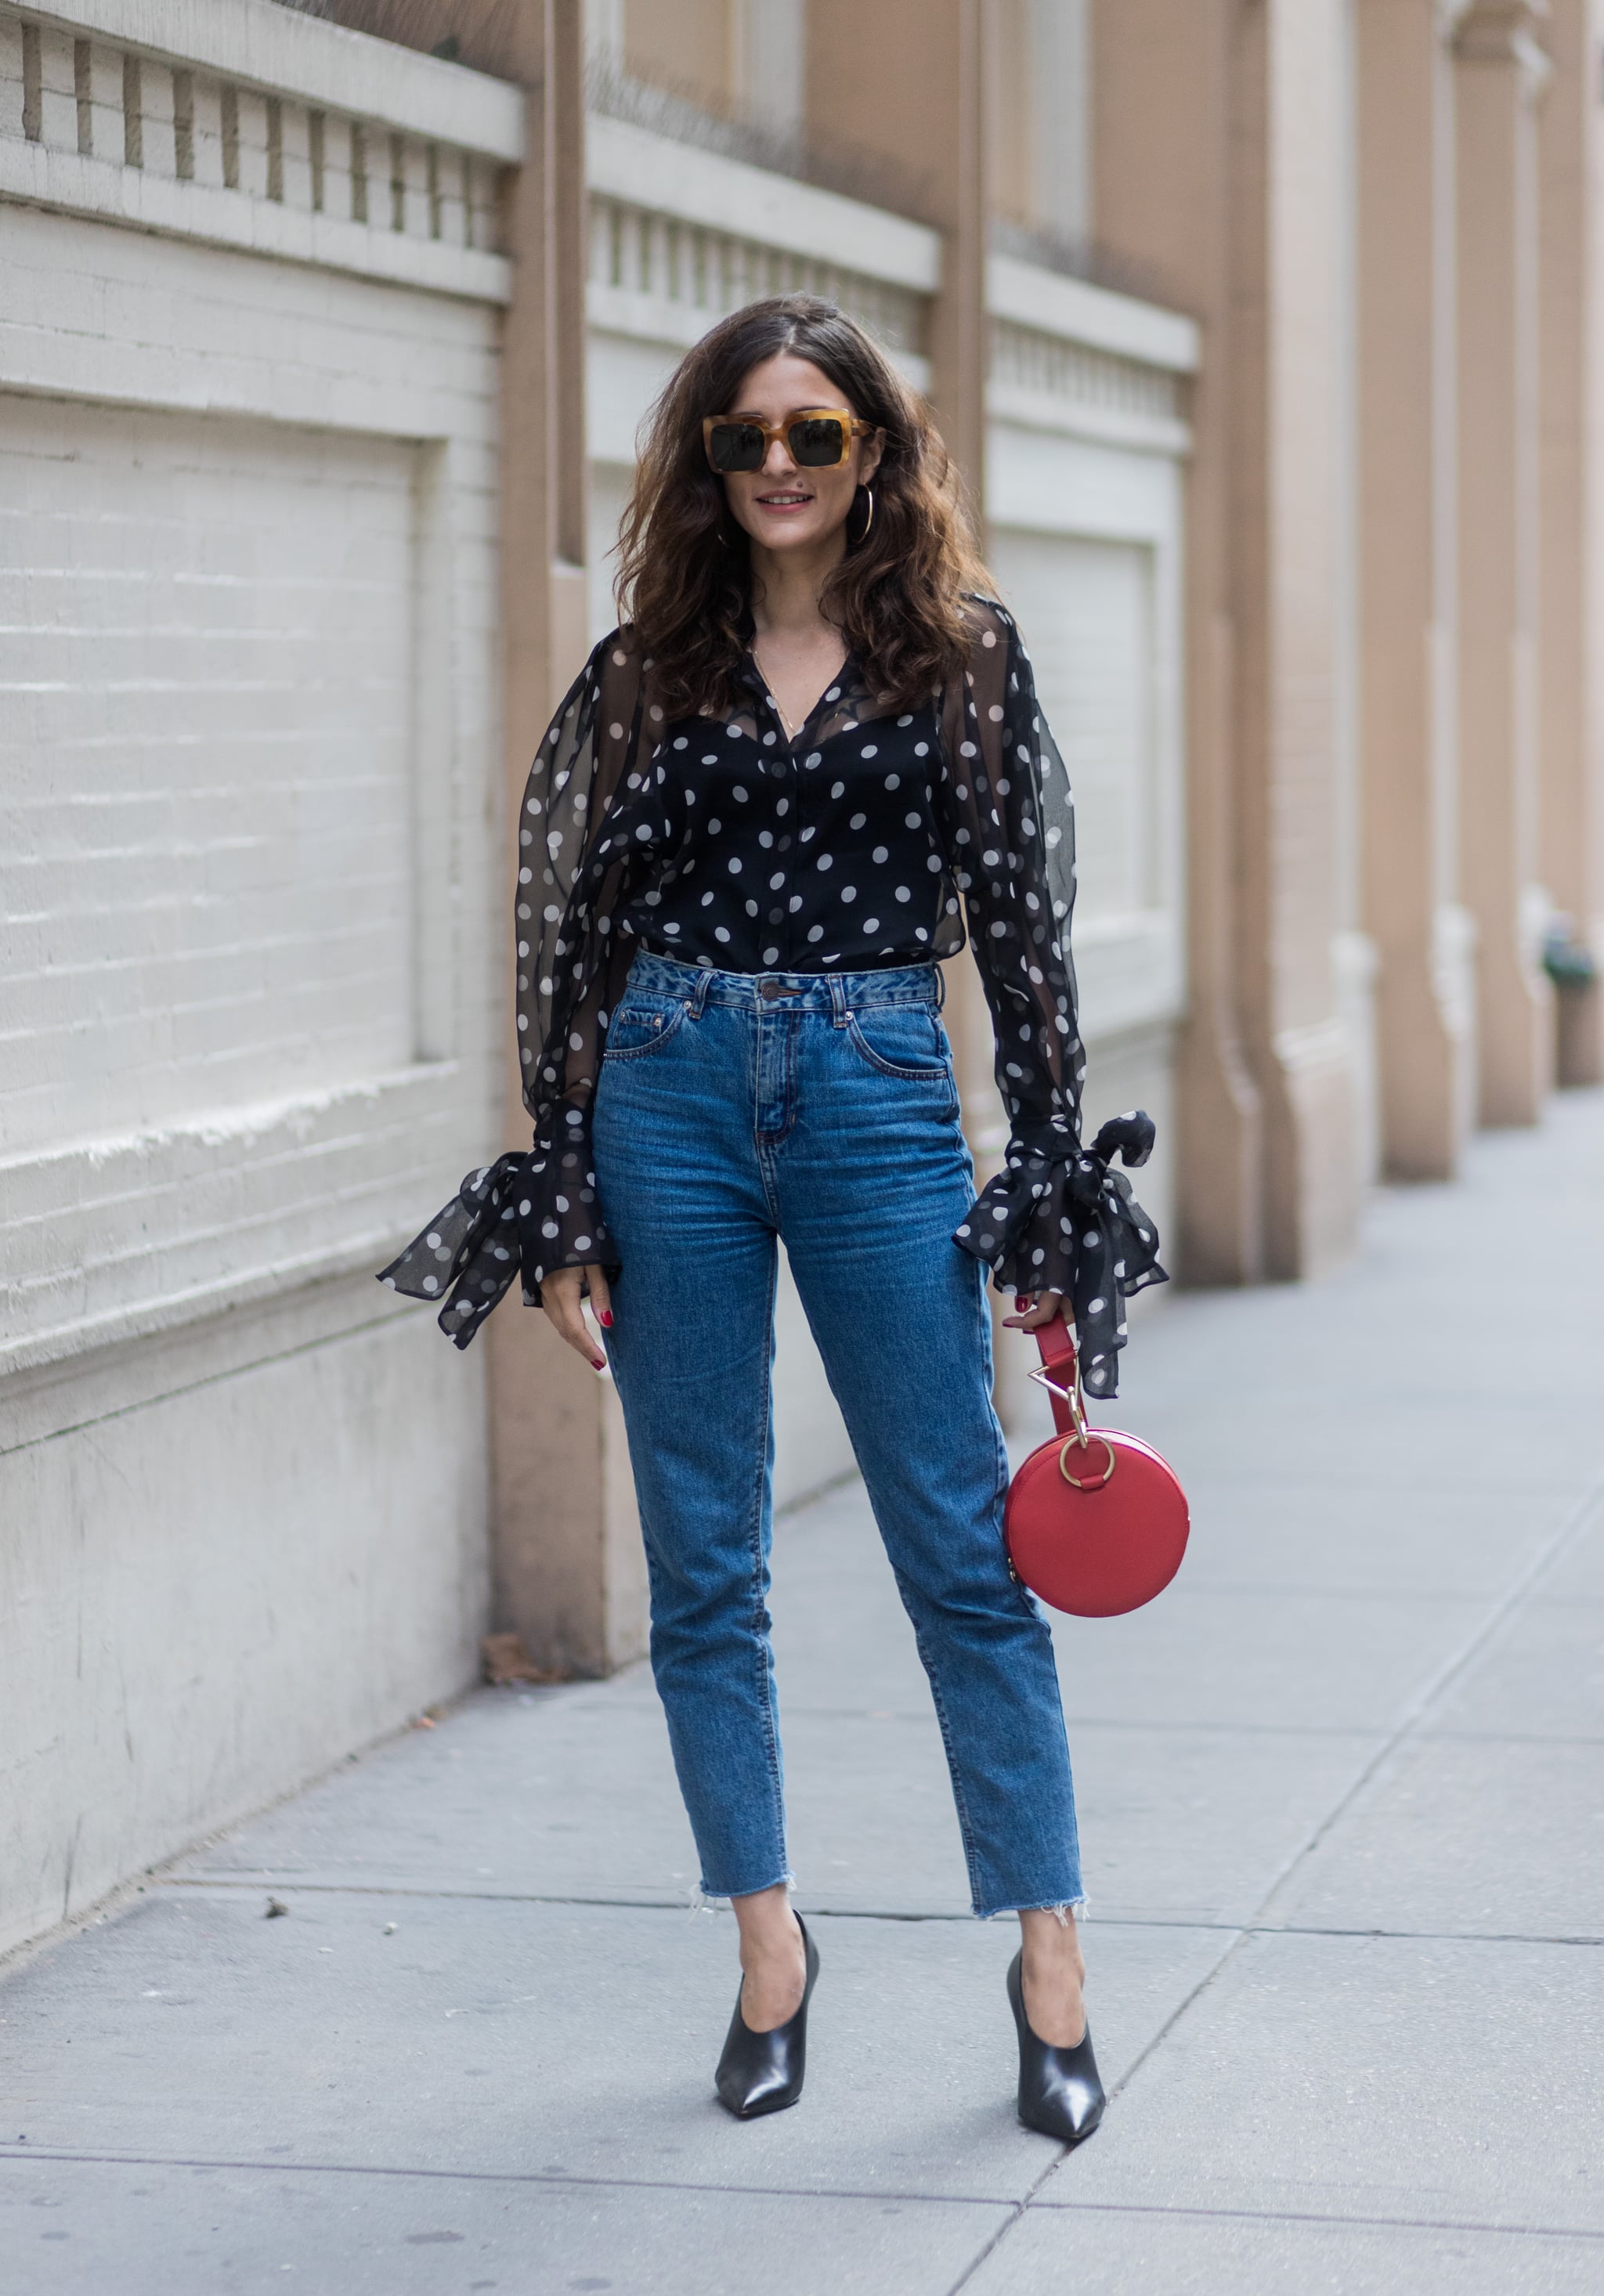 20 Red Bag Outfit Ideas - all black with jeans an a pop of color